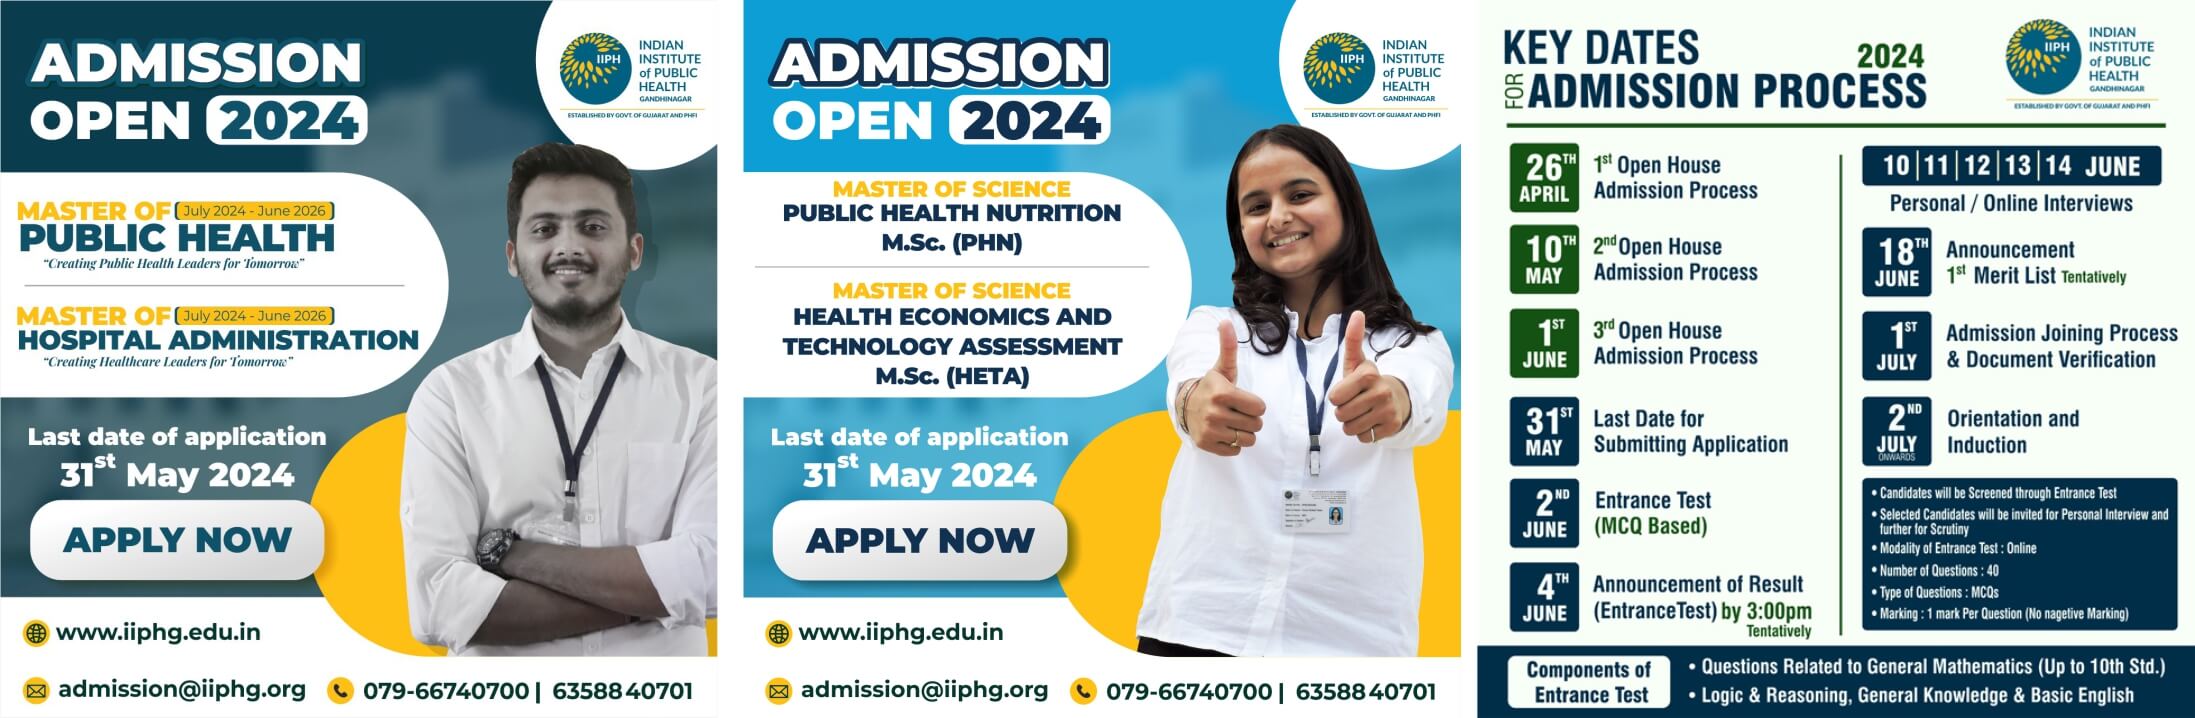 iipgh-admission